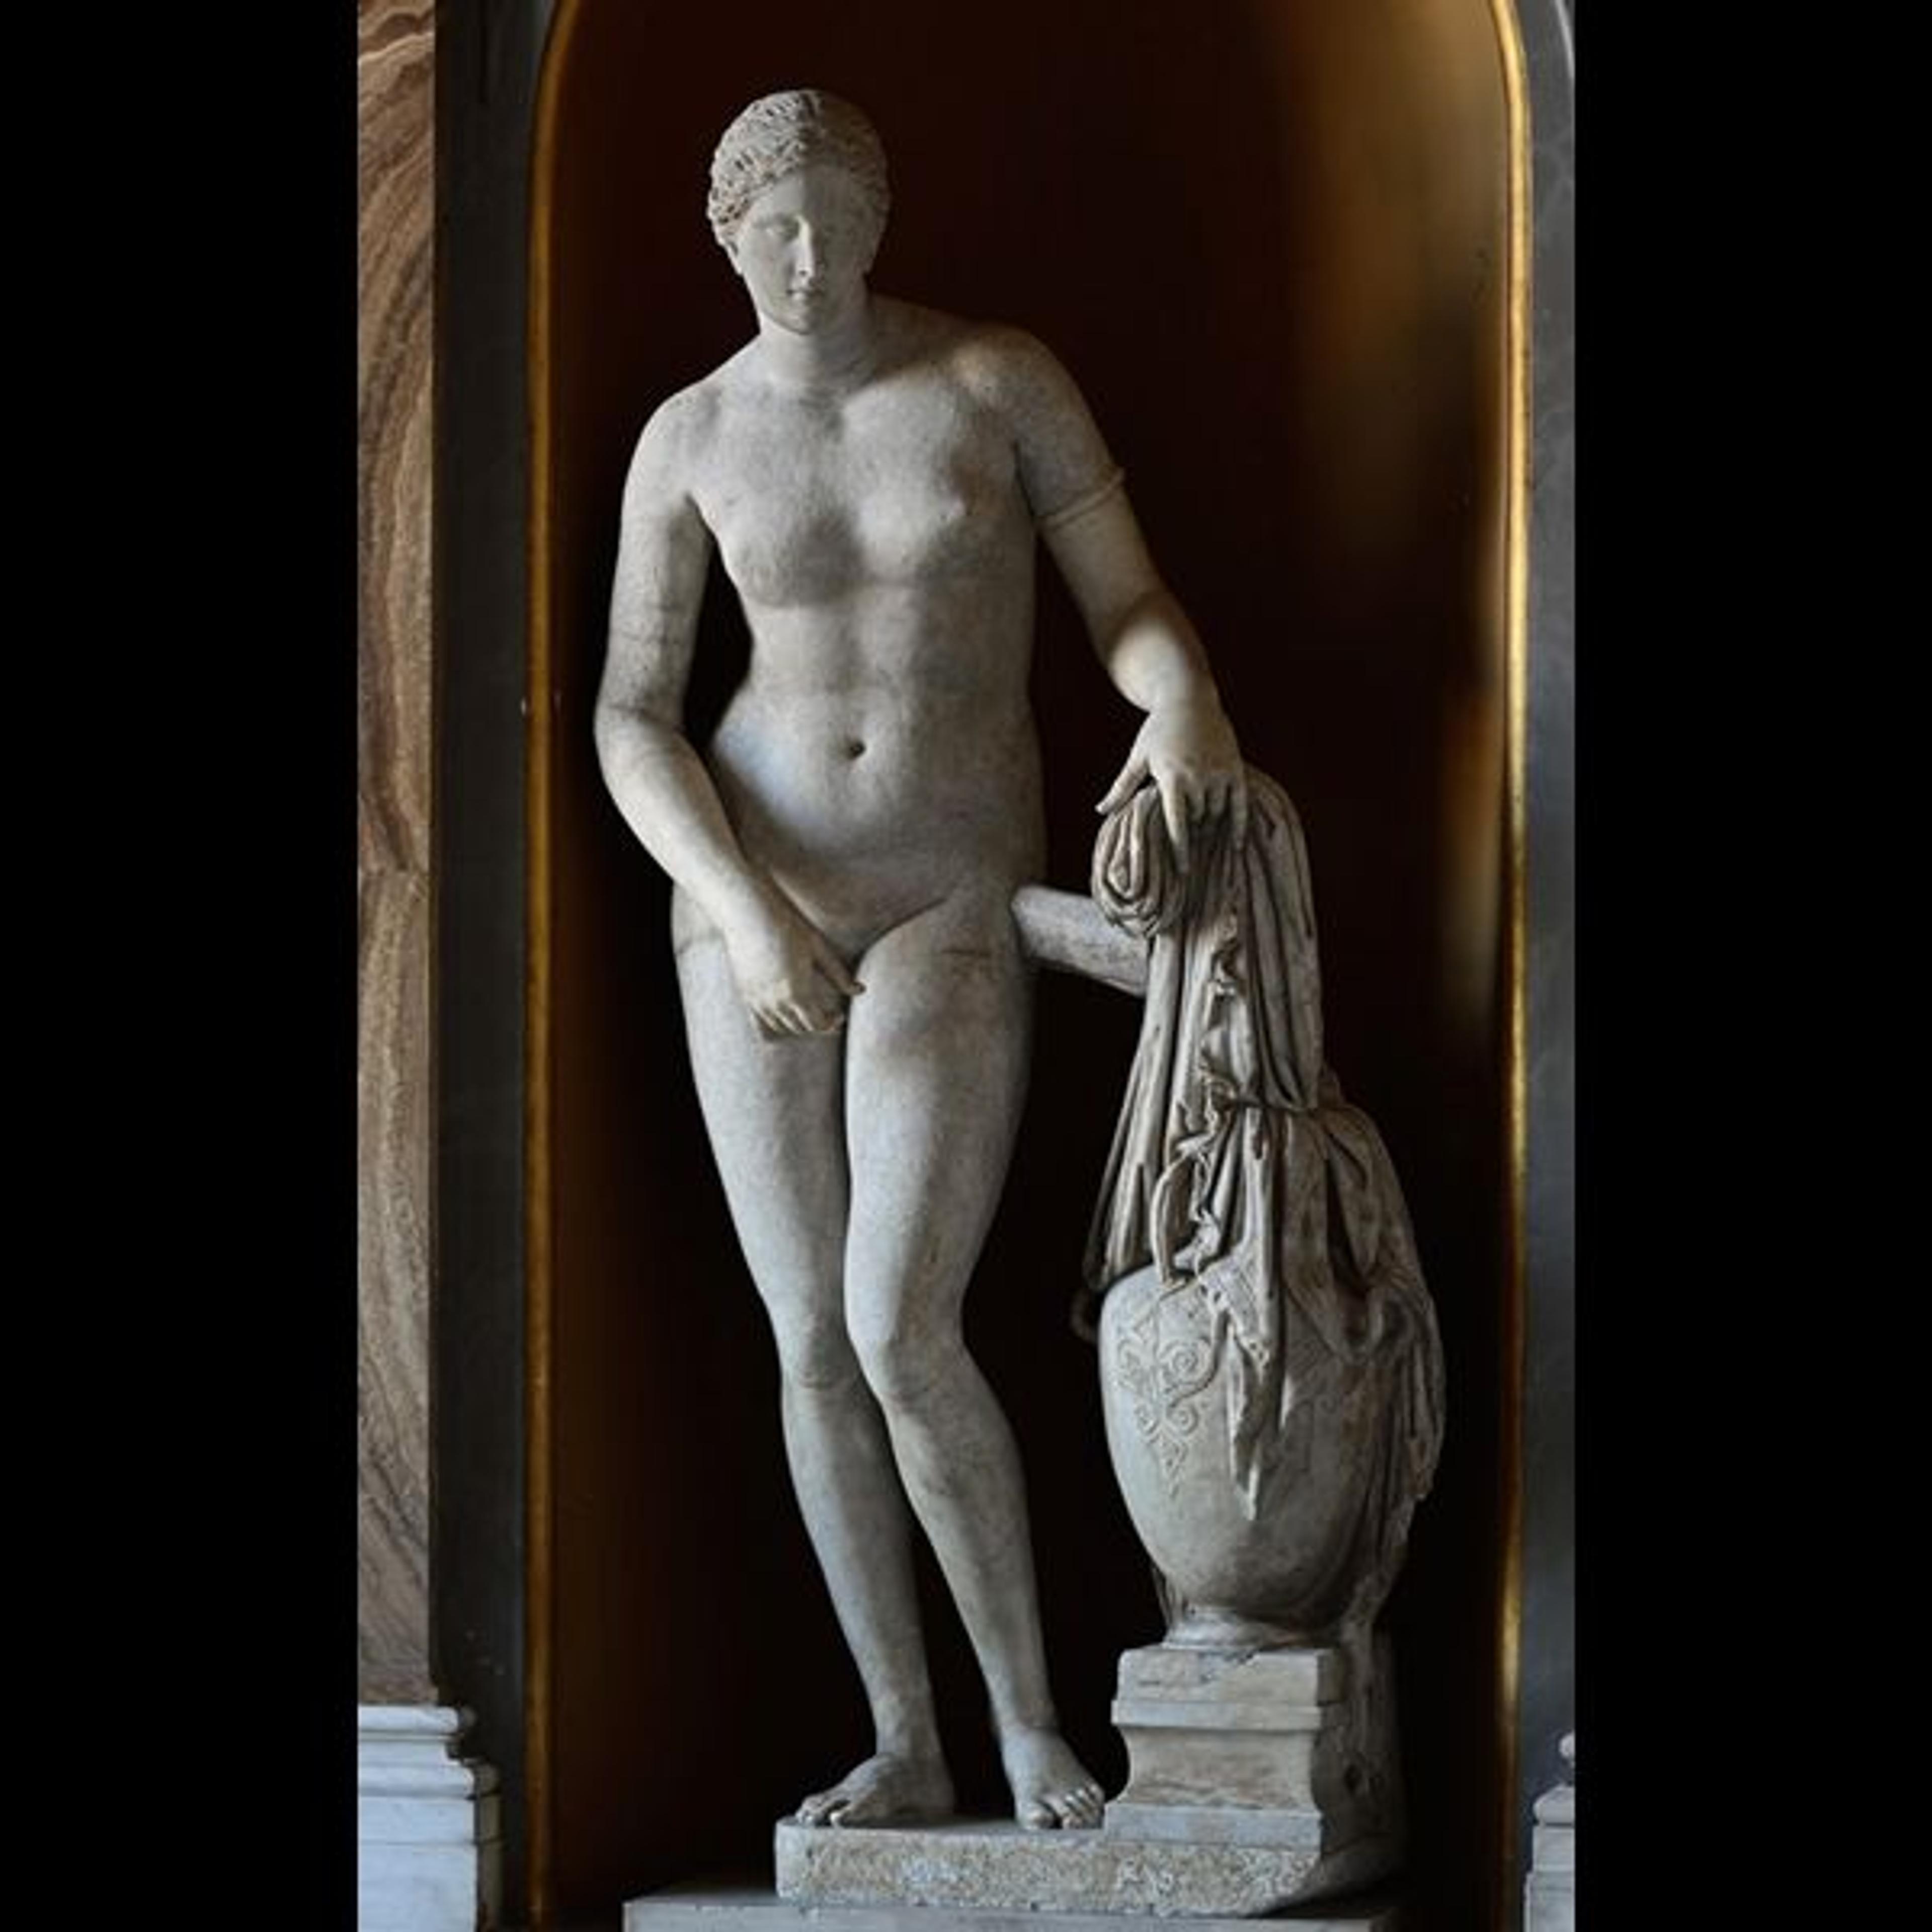 Photo of the marble statue known as "Colonna Venus" as installed in the Vatican Museums